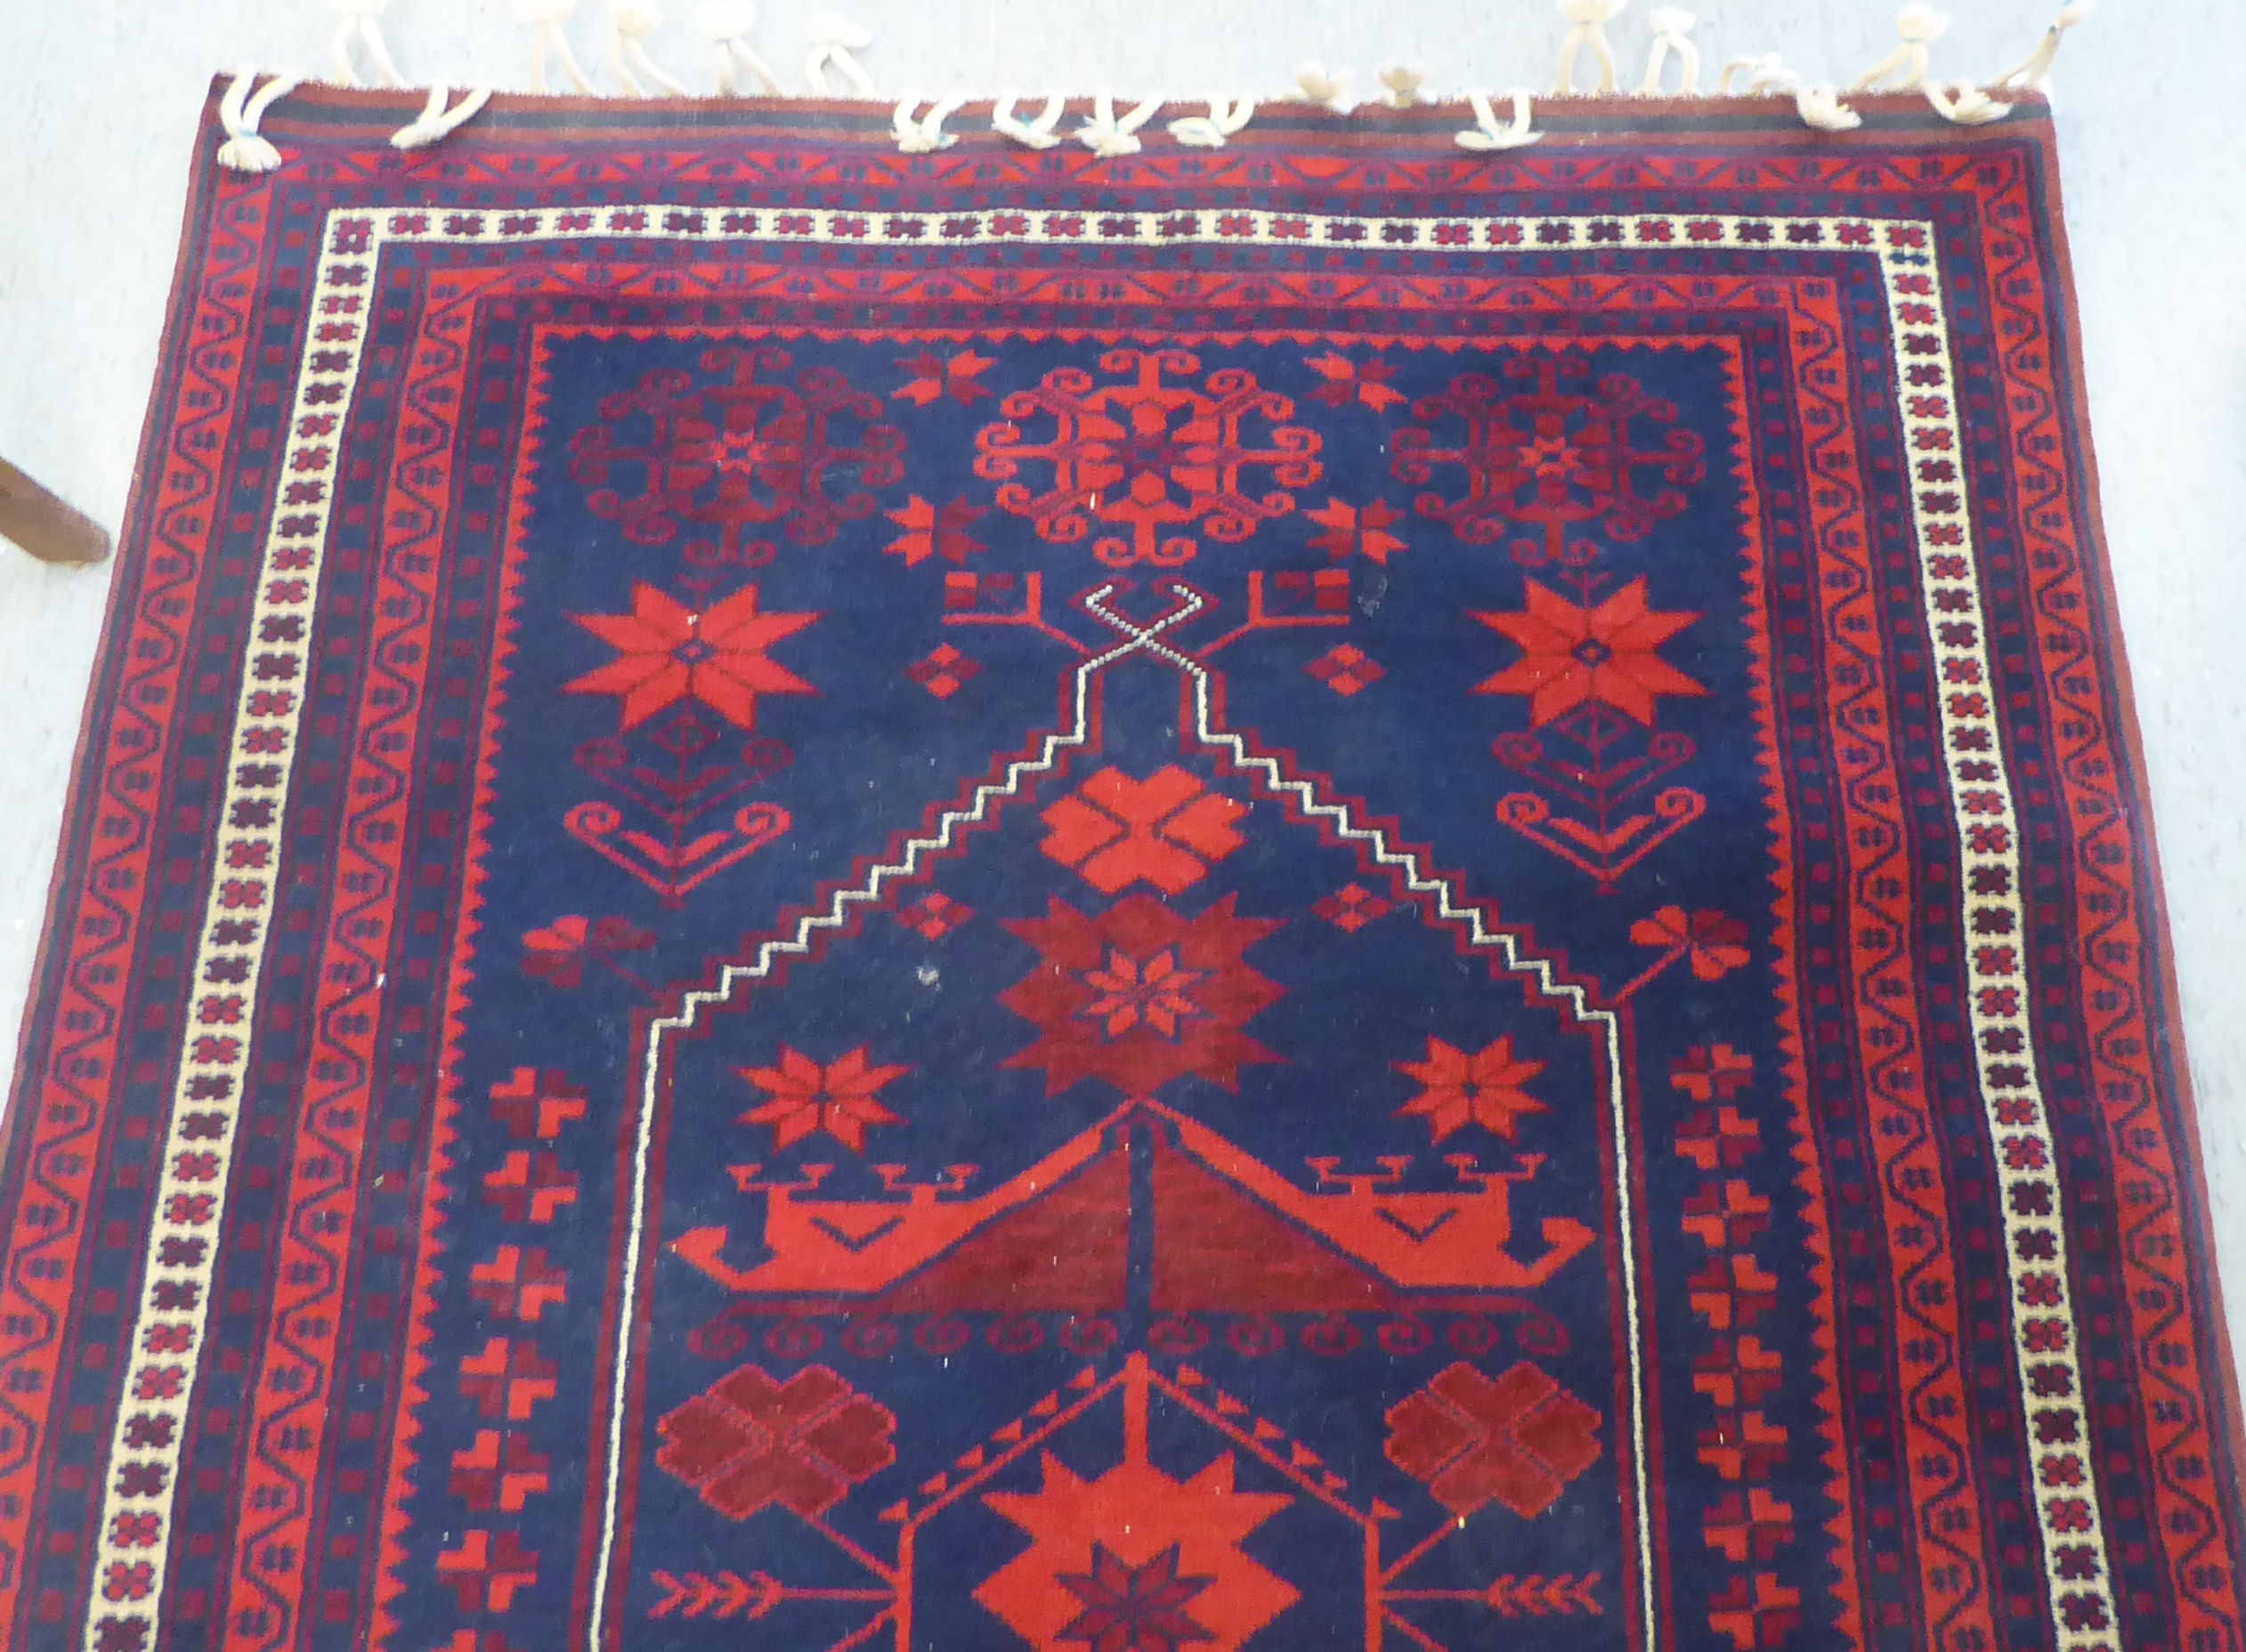 A Turkish rug, decorated with geometric patterns, on a red and blue ground  48" x 78" - Image 3 of 4